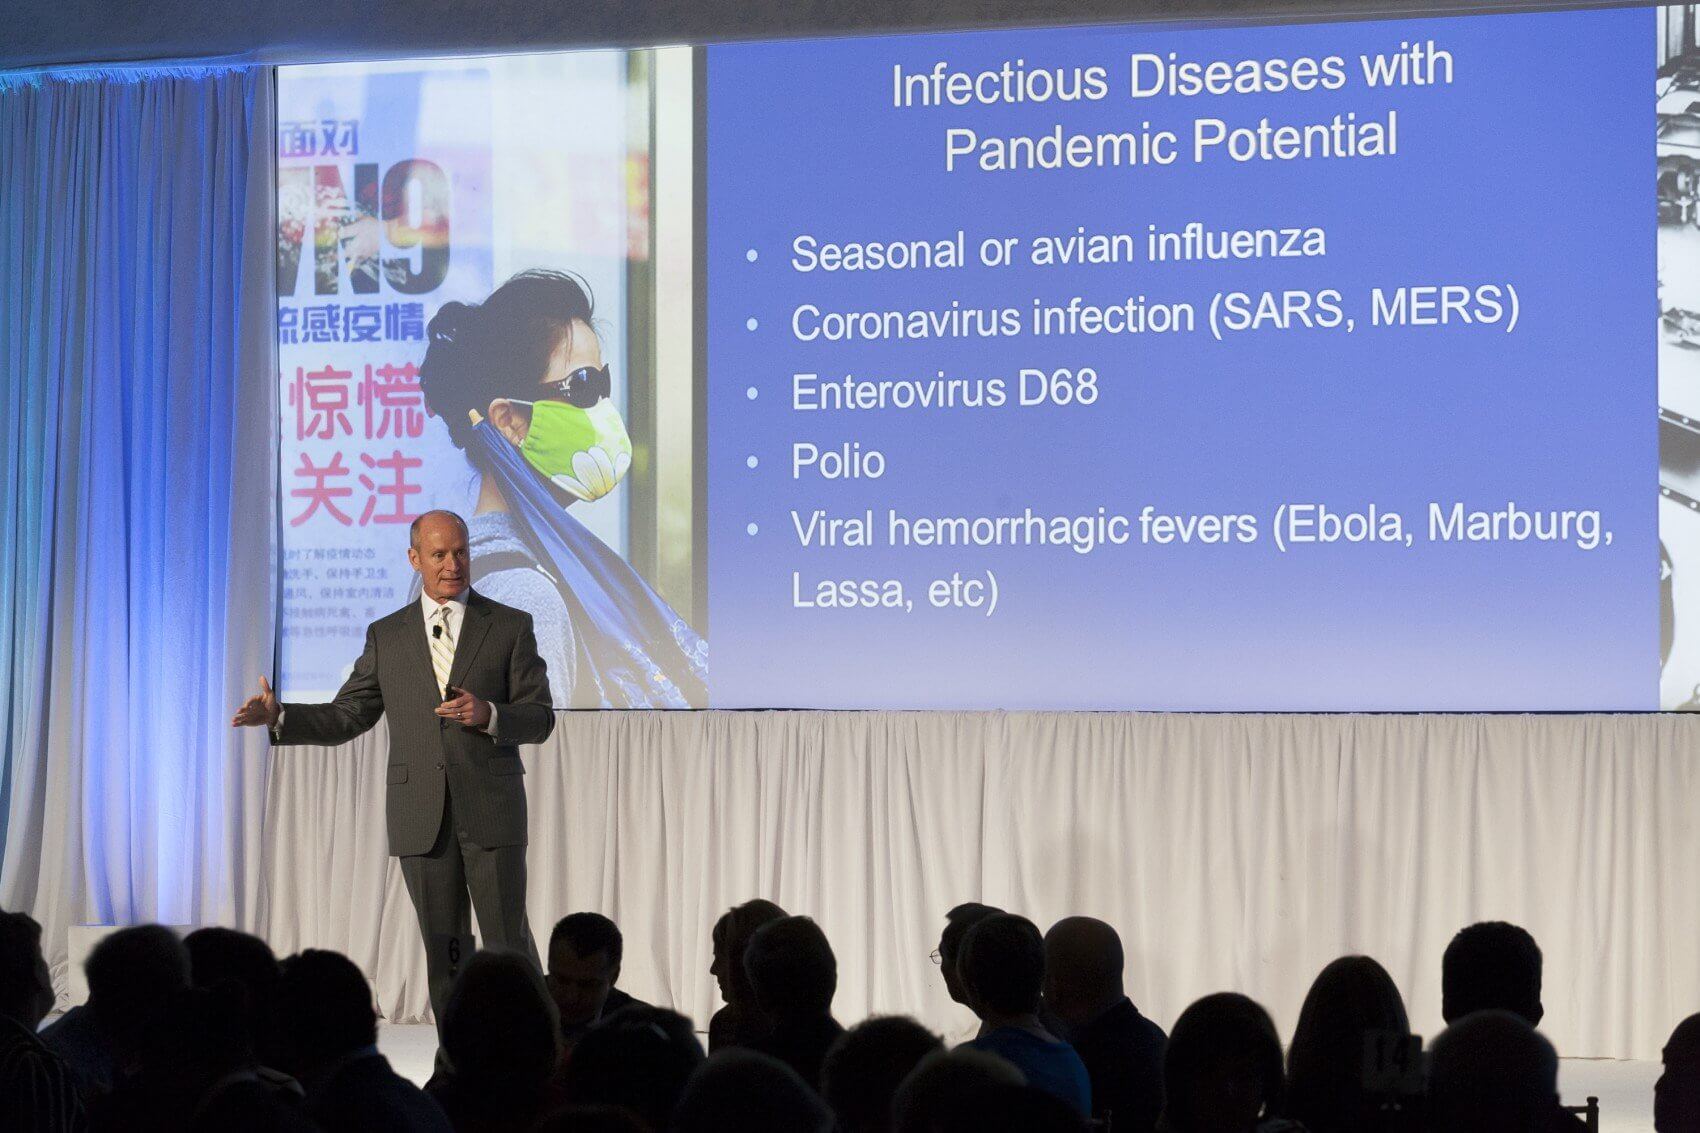 Dr. Mark W. Kline, physician-in-chief at Texas Children’s Hospital, describes infectious diseases with pandemic potential (Credit: John Lewis Photography)